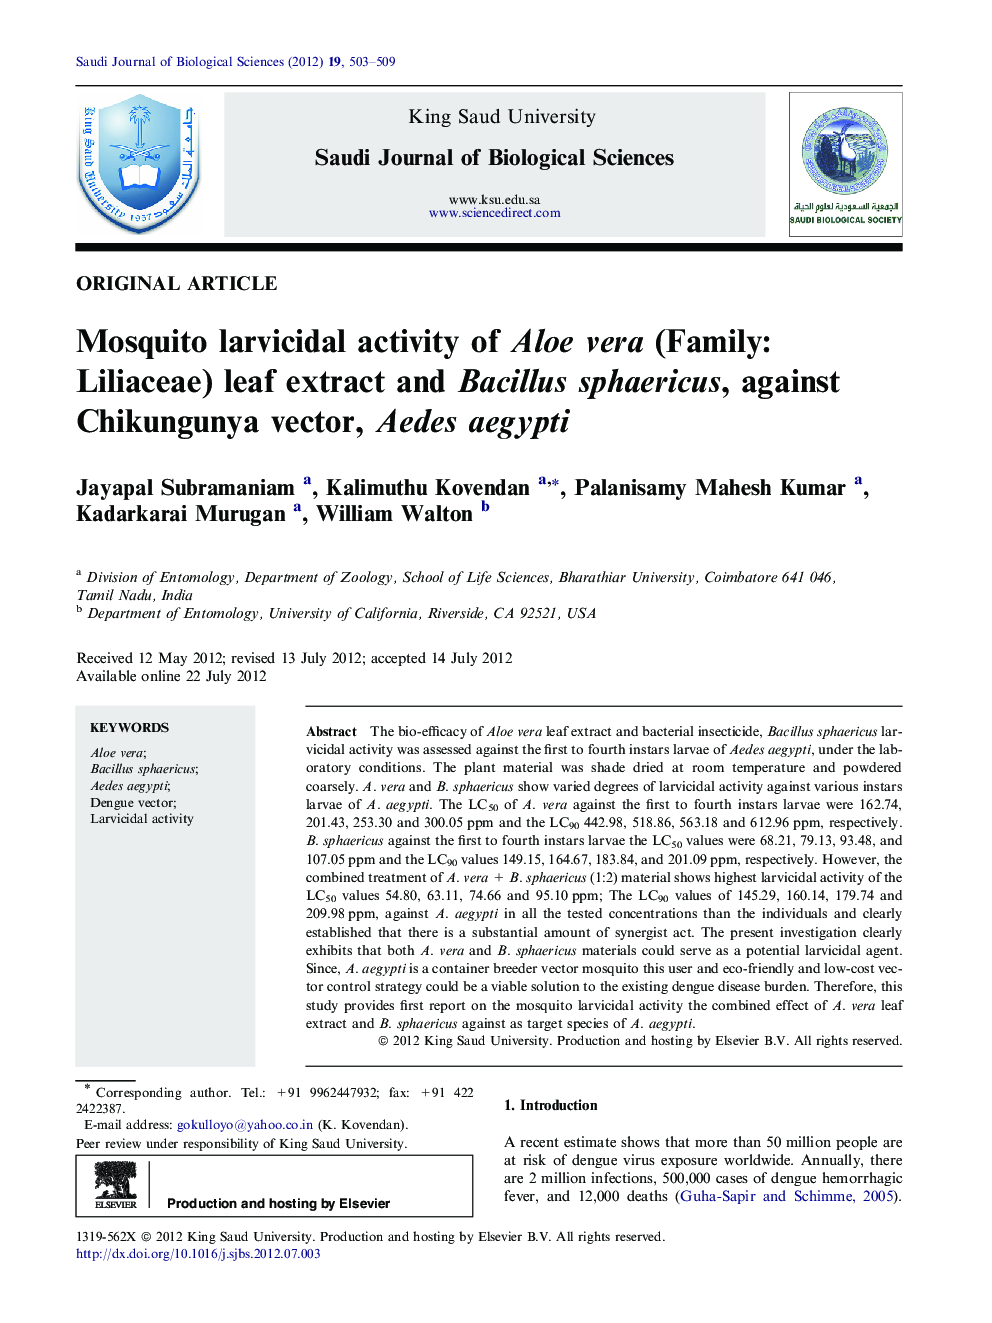 Mosquito larvicidal activity of Aloe vera (Family: Liliaceae) leaf extract and Bacillus sphaericus, against Chikungunya vector, Aedes aegypti 